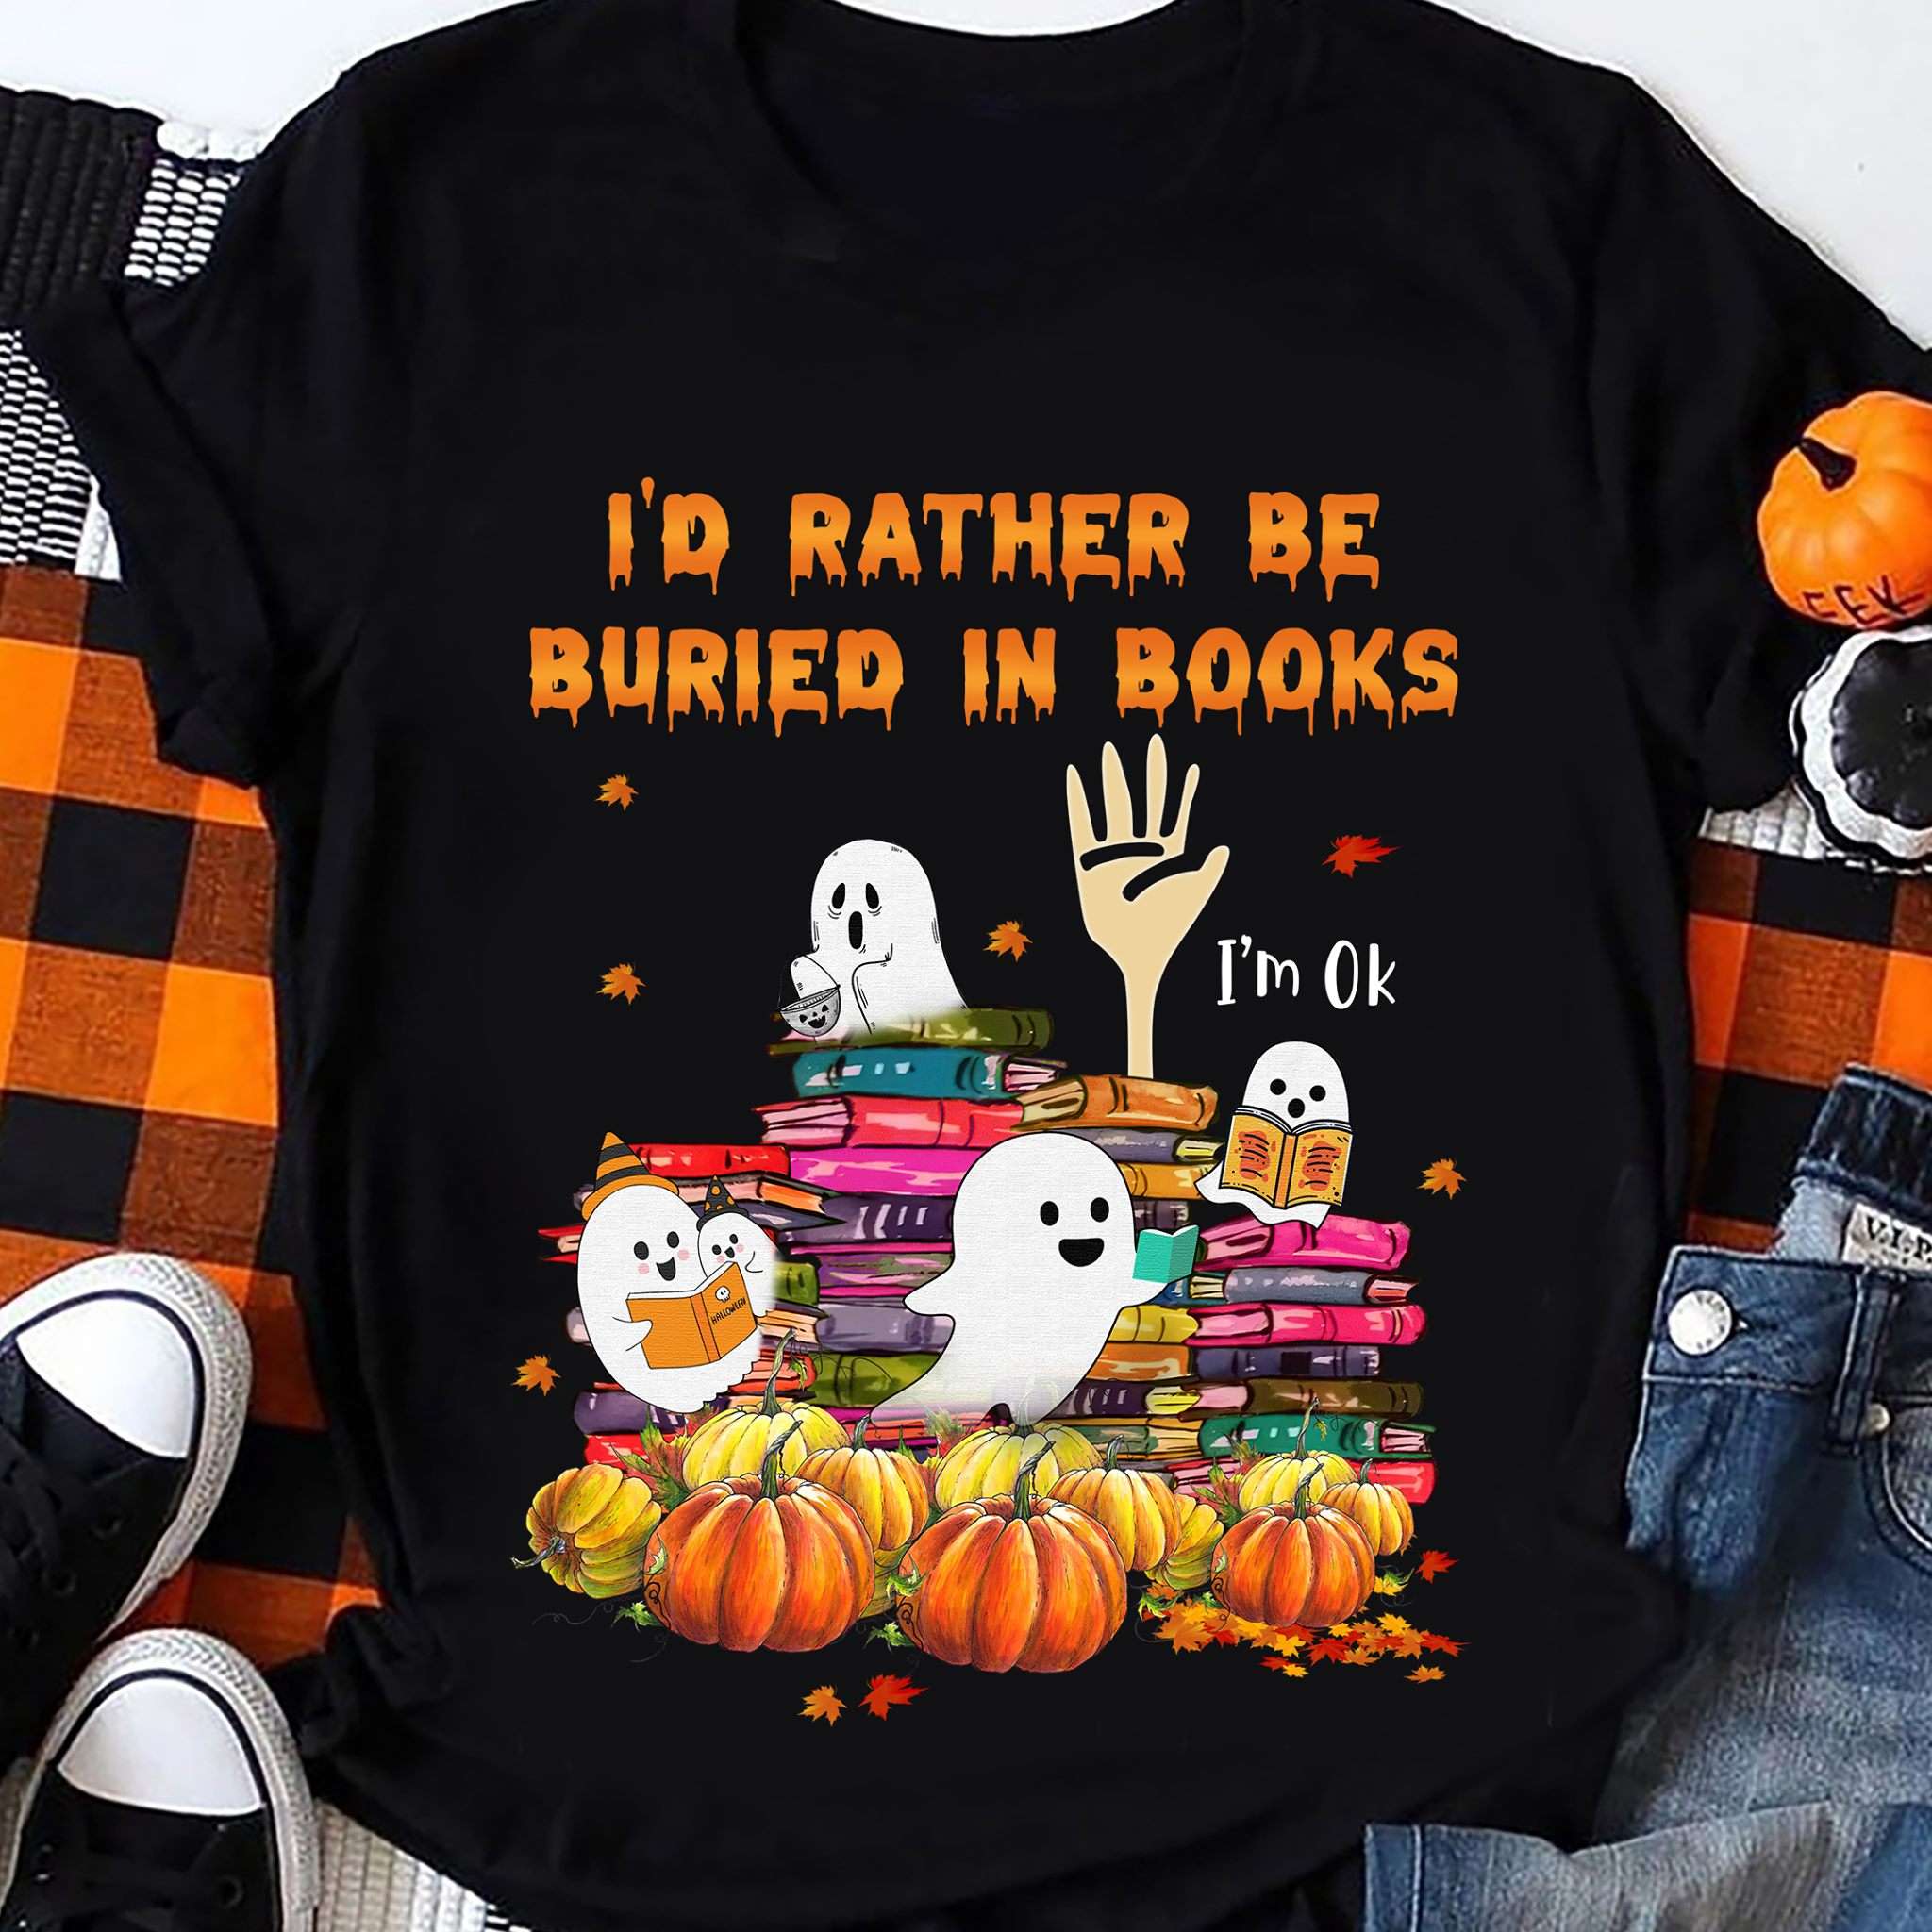 I'd rather be buried in books - White boo and books, Halloween T-shirt for bookaholic